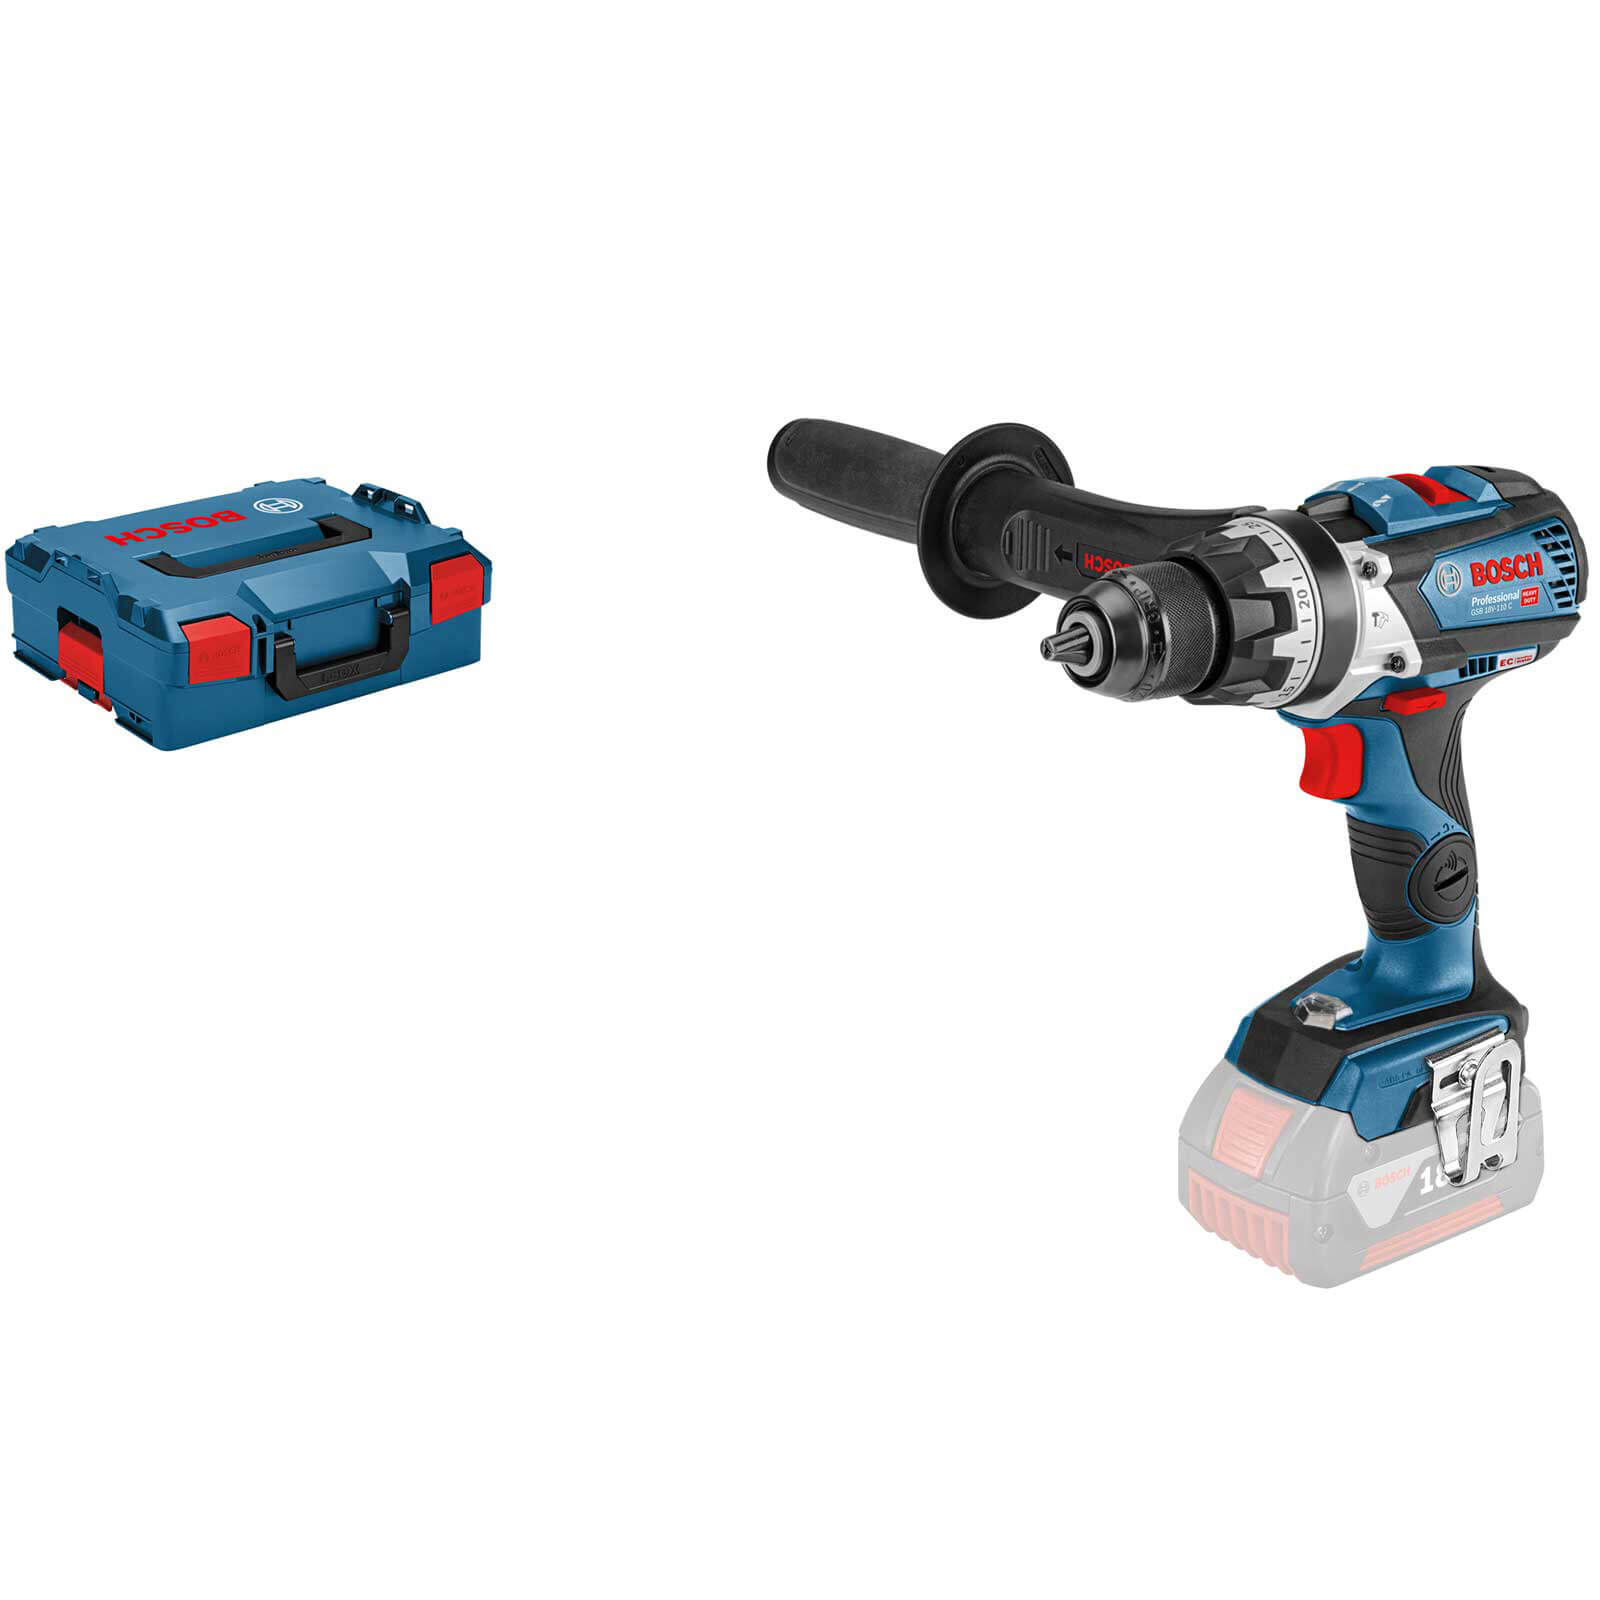 Image of Bosch GSB 18V-110 18v Cordless Brushless Combi Drill Connect Ready No Batteries No Charger Case